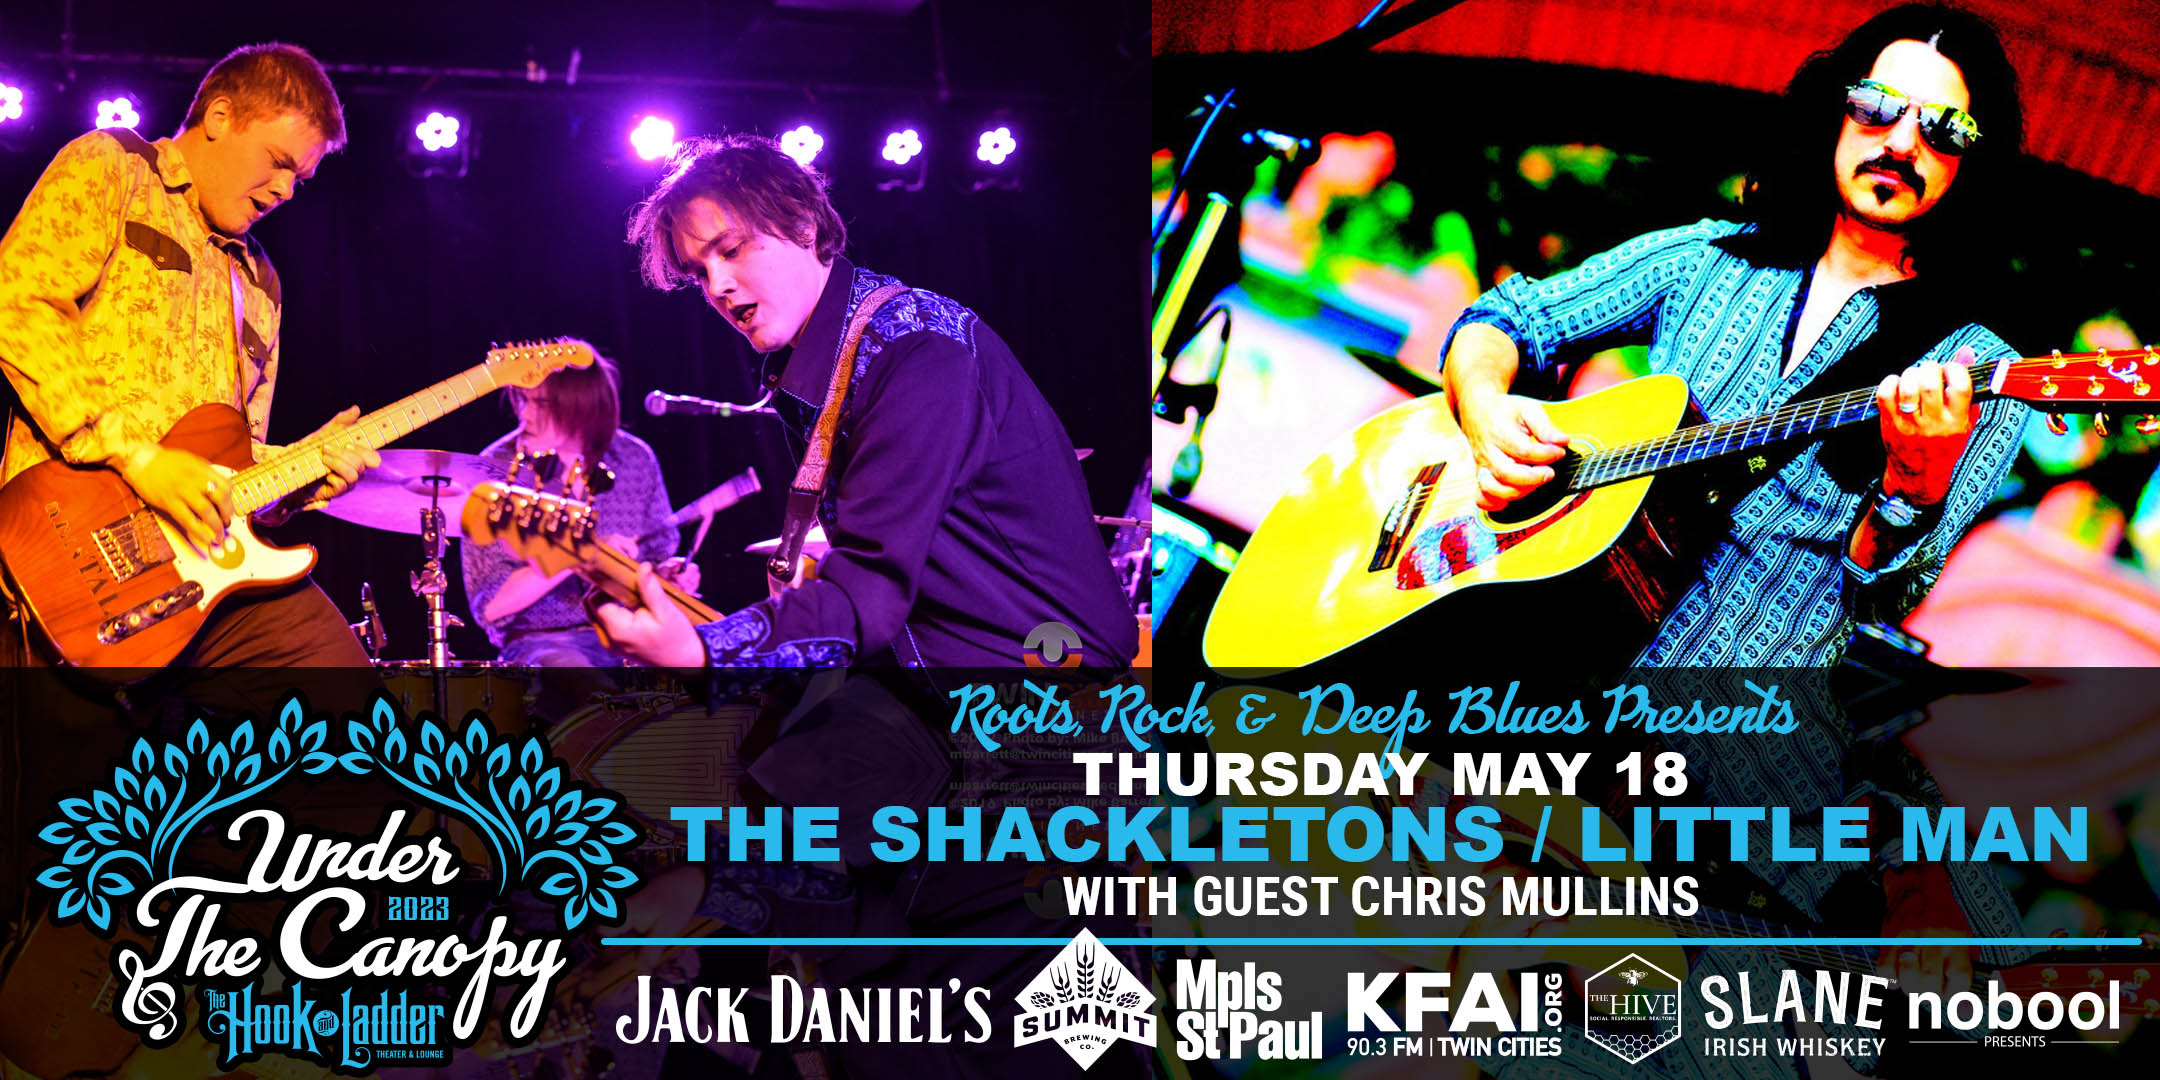 Roots, Rock, & Deep Blues Presents The Shackletons / Little Man with special guest Chris Mullins (FL) Thursday, May 18, 2023 Under The Canopy at The Hook and Ladder Theater "An Urban Outdoor Summer Concert Series" Doors 6:00pm :: Music 7:00pm :: 21+ GA: $15 ADV / $20 DOS *Does not include Fees